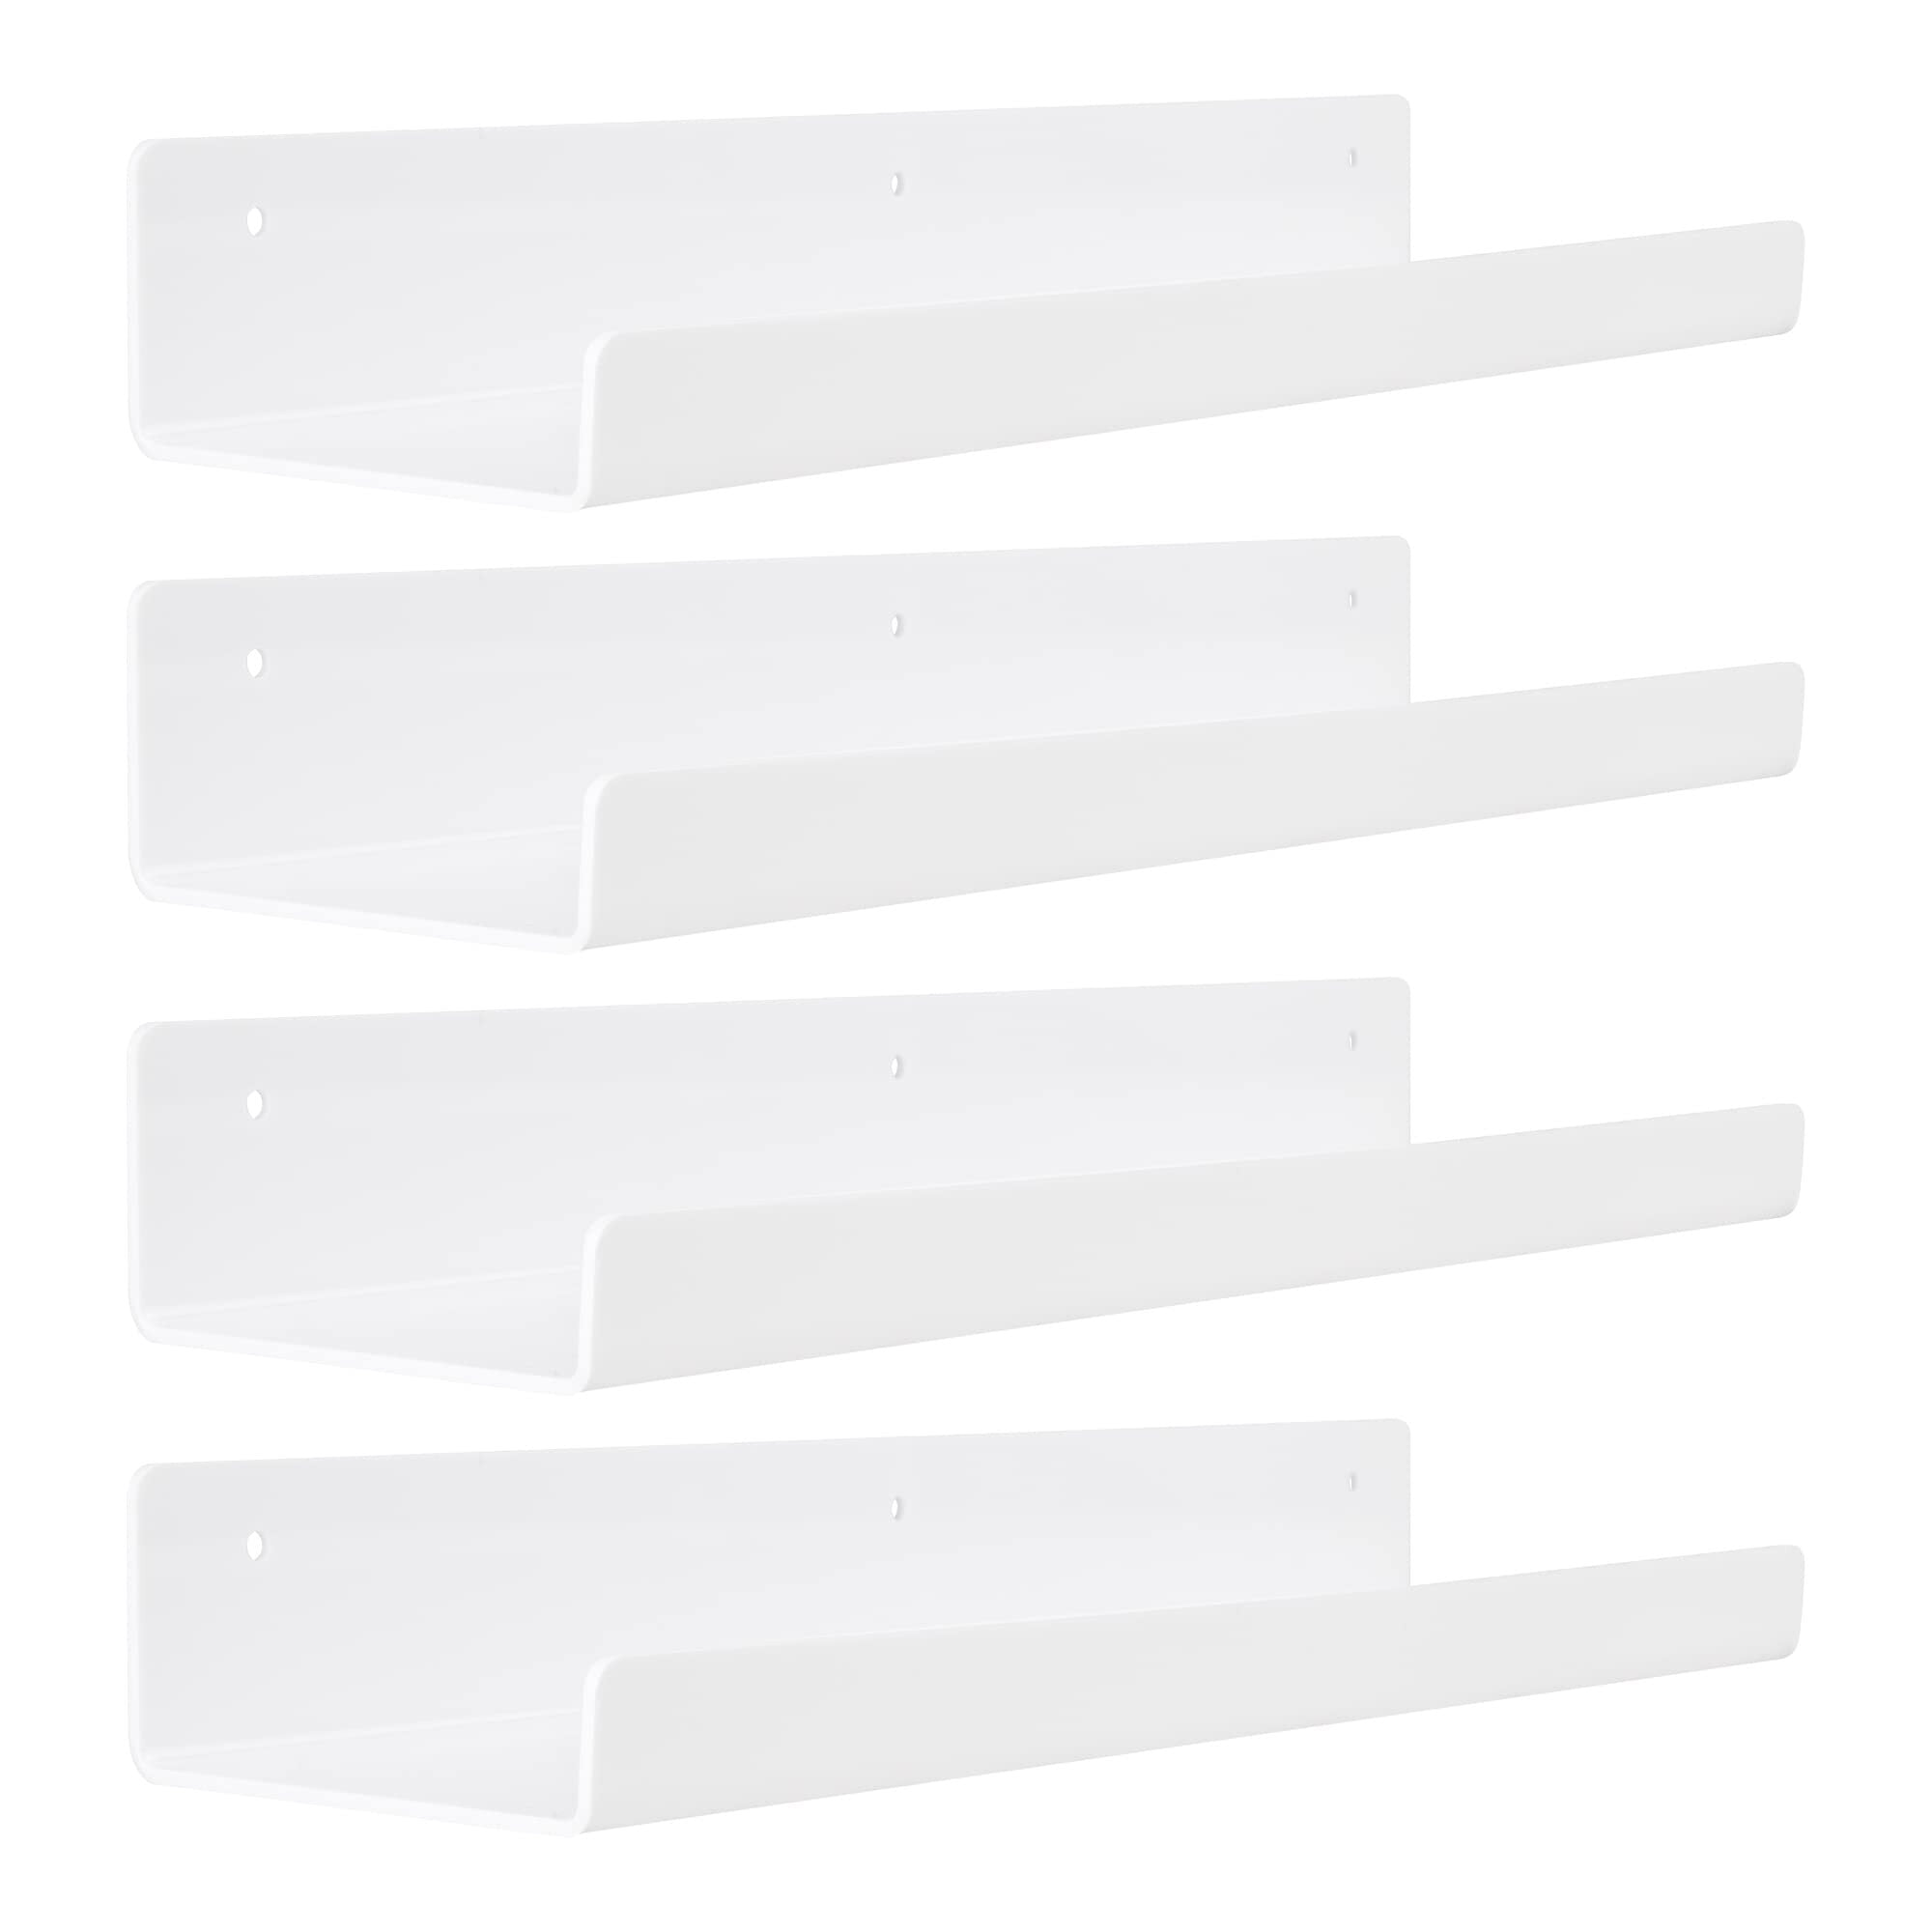 15 inch Acrylic Floating Shelves Wall Mounted, upsimples 4Pack Clear Acrylic Shelves, for Bedroom, Living Room, Bathroom, Kitchen, Size: 15L x 4H x 2W